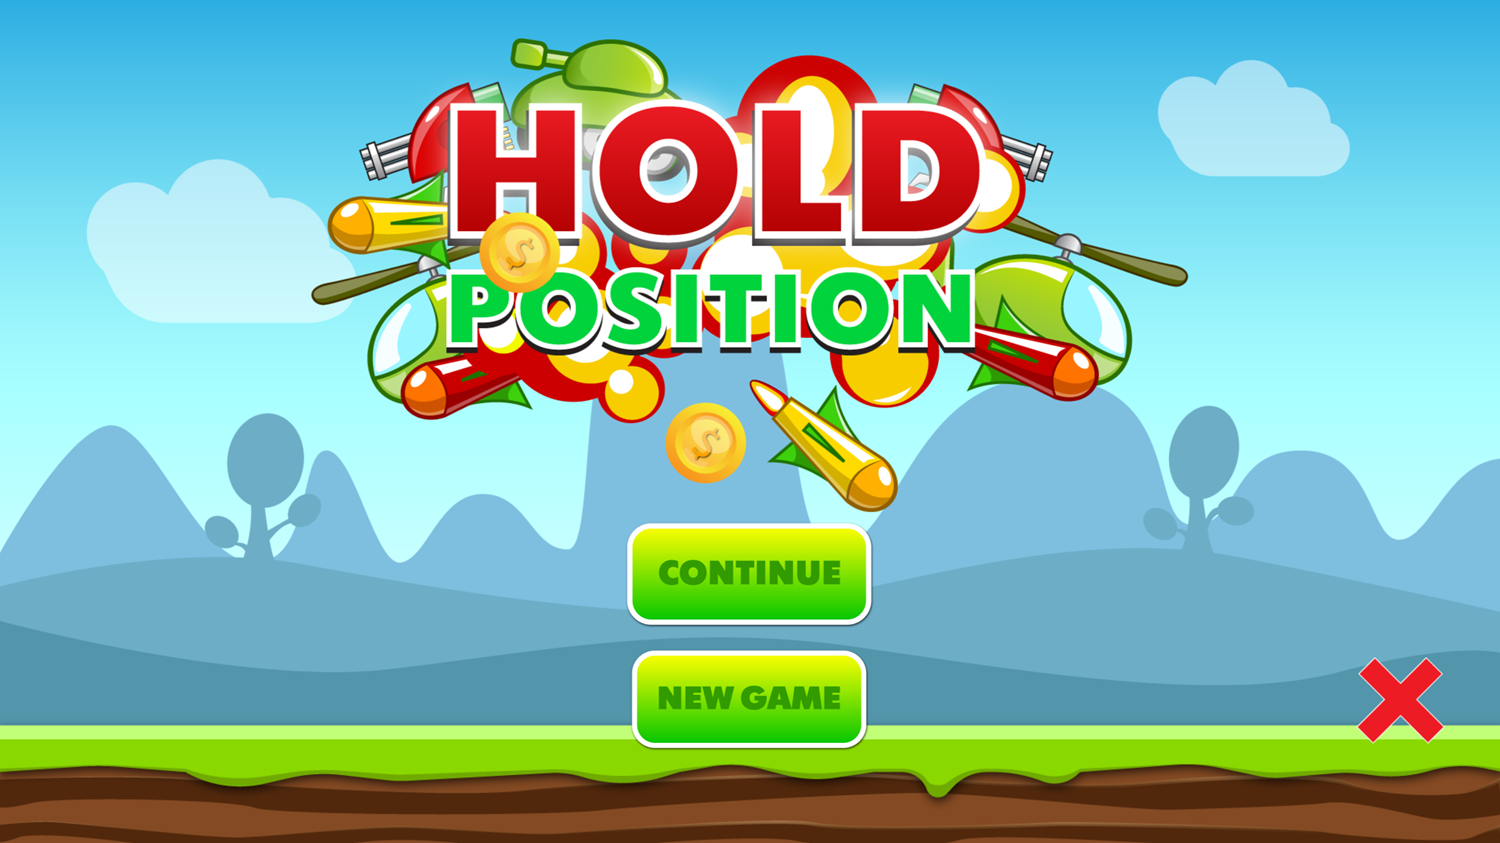 Hold Position Game Welcome Screenshot.